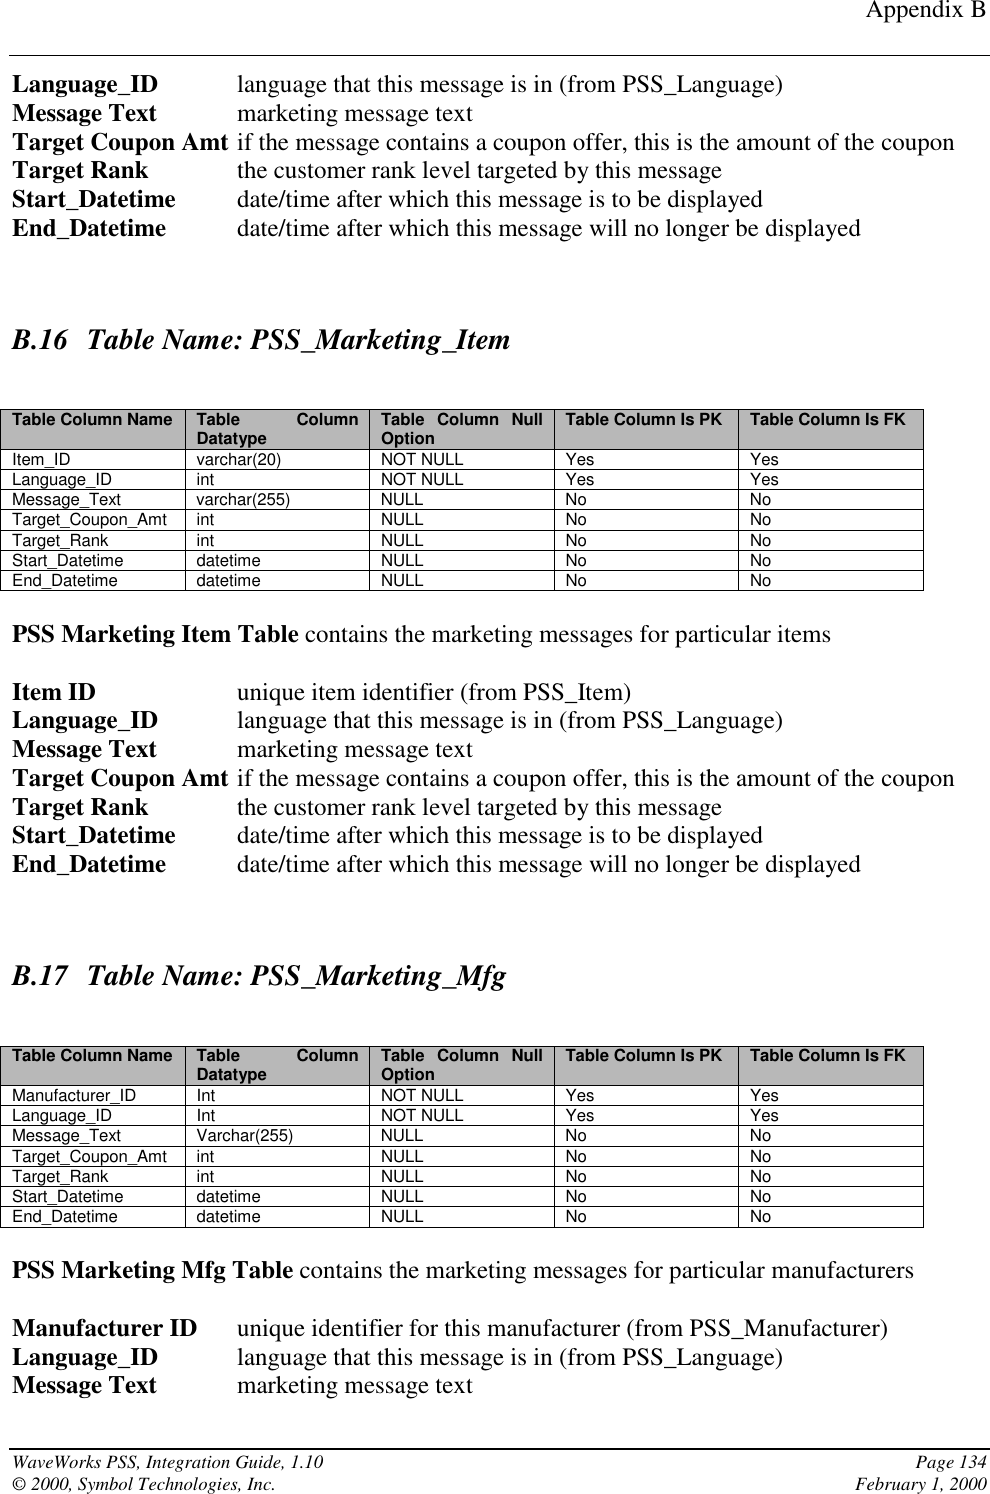 Appendix BWaveWorks PSS, Integration Guide, 1.10 Page 134© 2000, Symbol Technologies, Inc. February 1, 2000Language_ID language that this message is in (from PSS_Language)Message Text marketing message textTarget Coupon Amt if the message contains a coupon offer, this is the amount of the couponTarget Rank the customer rank level targeted by this messageStart_Datetime date/time after which this message is to be displayedEnd_Datetime date/time after which this message will no longer be displayedB.16 Table Name: PSS_Marketing_ItemTable Column Name Table ColumnDatatype Table Column NullOption Table Column Is PK Table Column Is FKItem_ID varchar(20) NOT NULL Yes YesLanguage_ID int NOT NULL Yes YesMessage_Text varchar(255) NULL No NoTarget_Coupon_Amt int NULL No NoTarget_Rank int NULL No NoStart_Datetime datetime NULL No NoEnd_Datetime datetime NULL No NoPSS Marketing Item Table contains the marketing messages for particular itemsItem ID unique item identifier (from PSS_Item)Language_ID language that this message is in (from PSS_Language)Message Text marketing message textTarget Coupon Amt if the message contains a coupon offer, this is the amount of the couponTarget Rank the customer rank level targeted by this messageStart_Datetime date/time after which this message is to be displayedEnd_Datetime date/time after which this message will no longer be displayedB.17 Table Name: PSS_Marketing_MfgTable Column Name Table ColumnDatatype Table Column NullOption Table Column Is PK Table Column Is FKManufacturer_ID Int NOT NULL Yes YesLanguage_ID Int NOT NULL Yes YesMessage_Text Varchar(255) NULL No NoTarget_Coupon_Amt int NULL No NoTarget_Rank int NULL No NoStart_Datetime datetime NULL No NoEnd_Datetime datetime NULL No NoPSS Marketing Mfg Table contains the marketing messages for particular manufacturersManufacturer ID unique identifier for this manufacturer (from PSS_Manufacturer)Language_ID language that this message is in (from PSS_Language)Message Text marketing message text